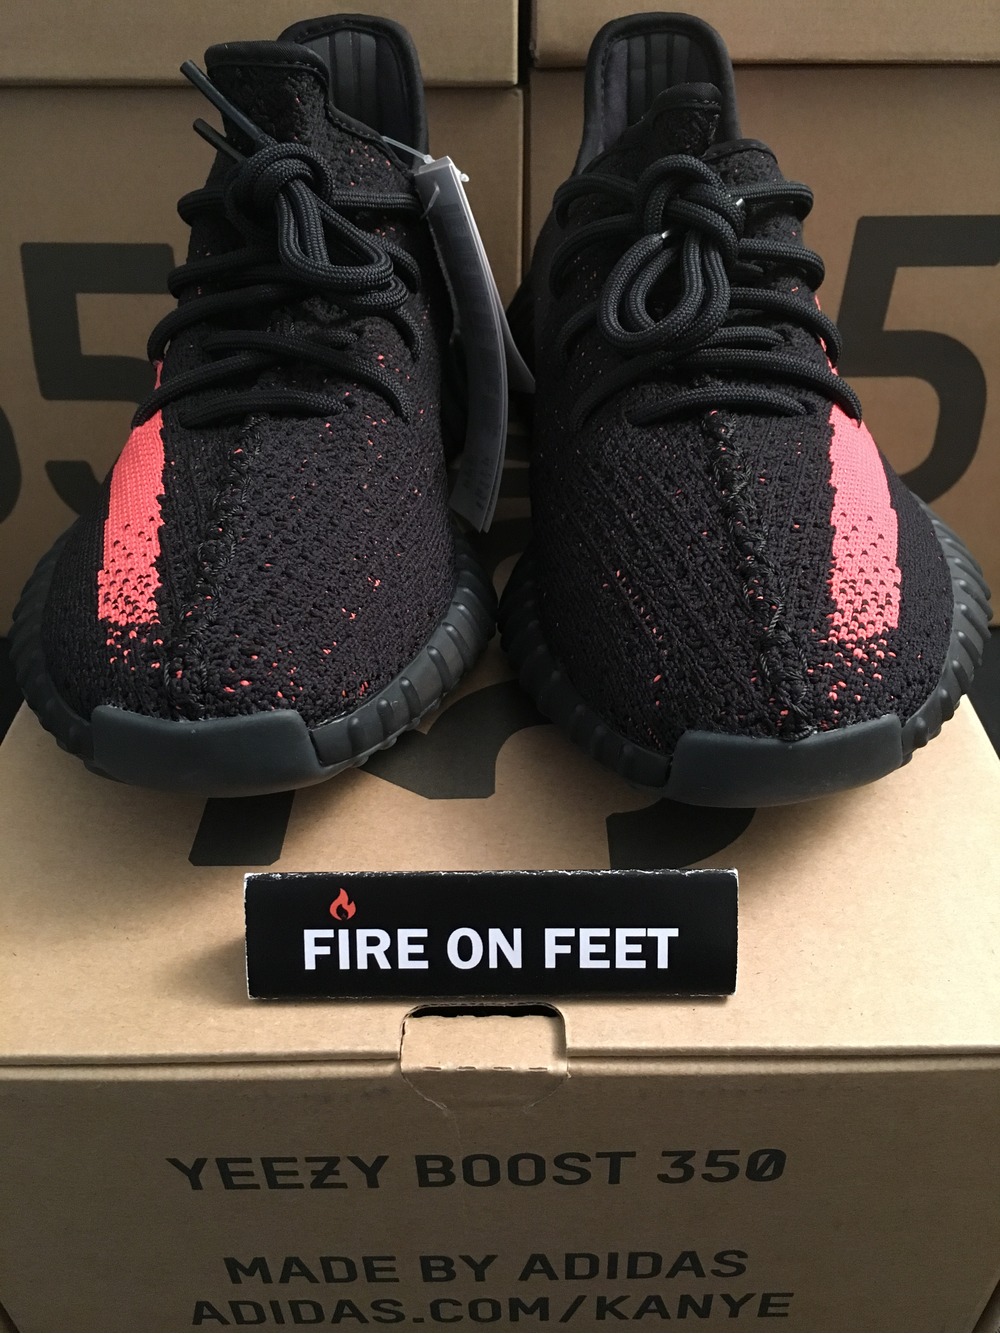 Adidas Yeezy Boost 350 v2 Black Red On Foot Video at Exclucity